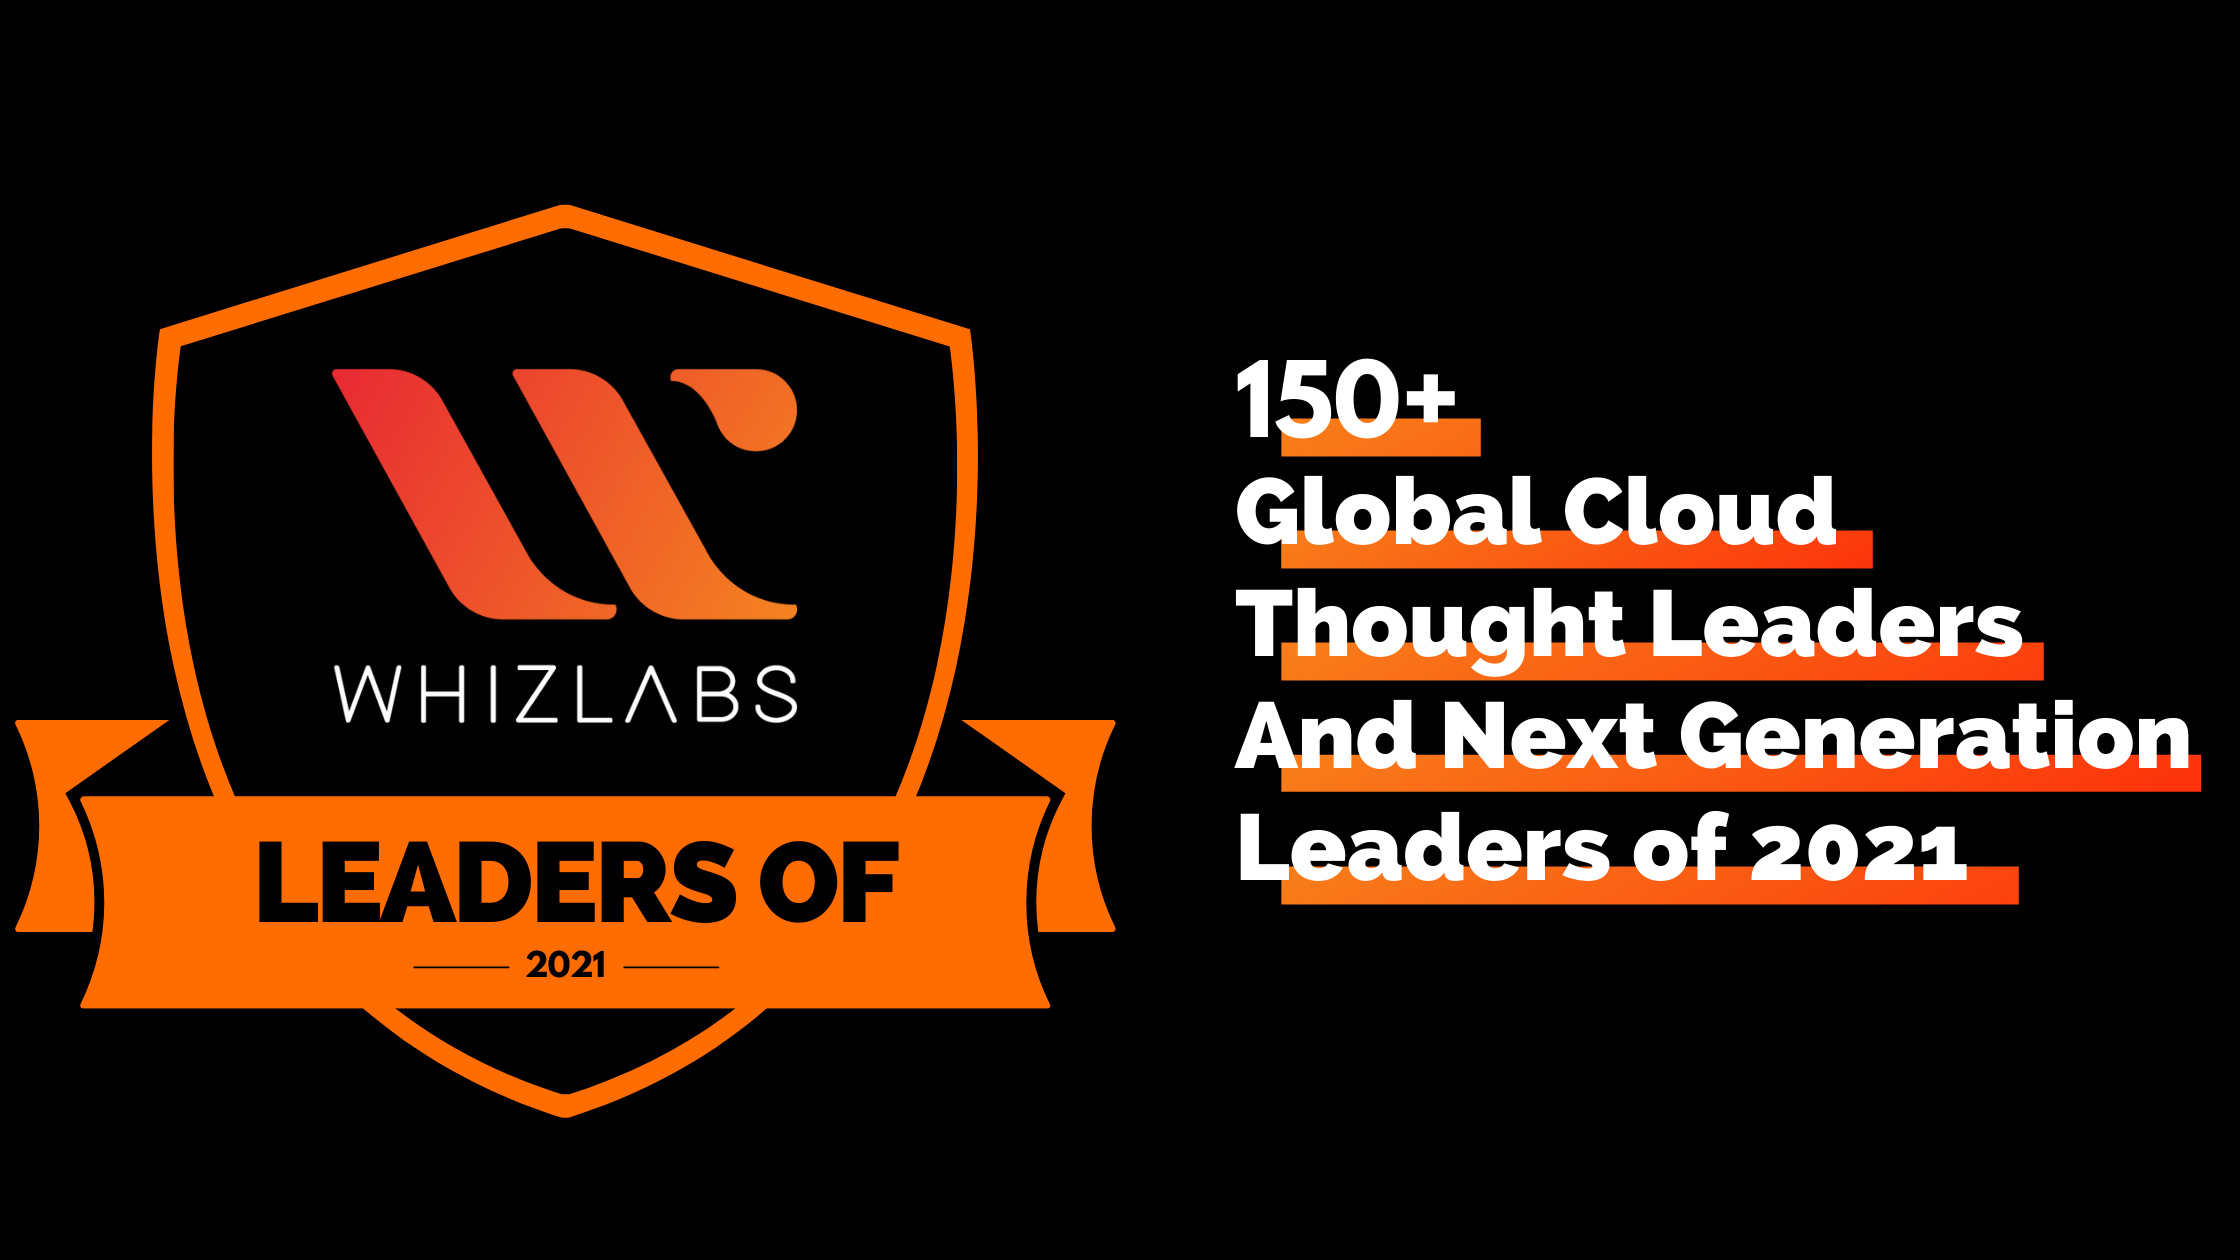 150+ Top Global Cloud Thought Leaders and Next Generation Leaders of 2021